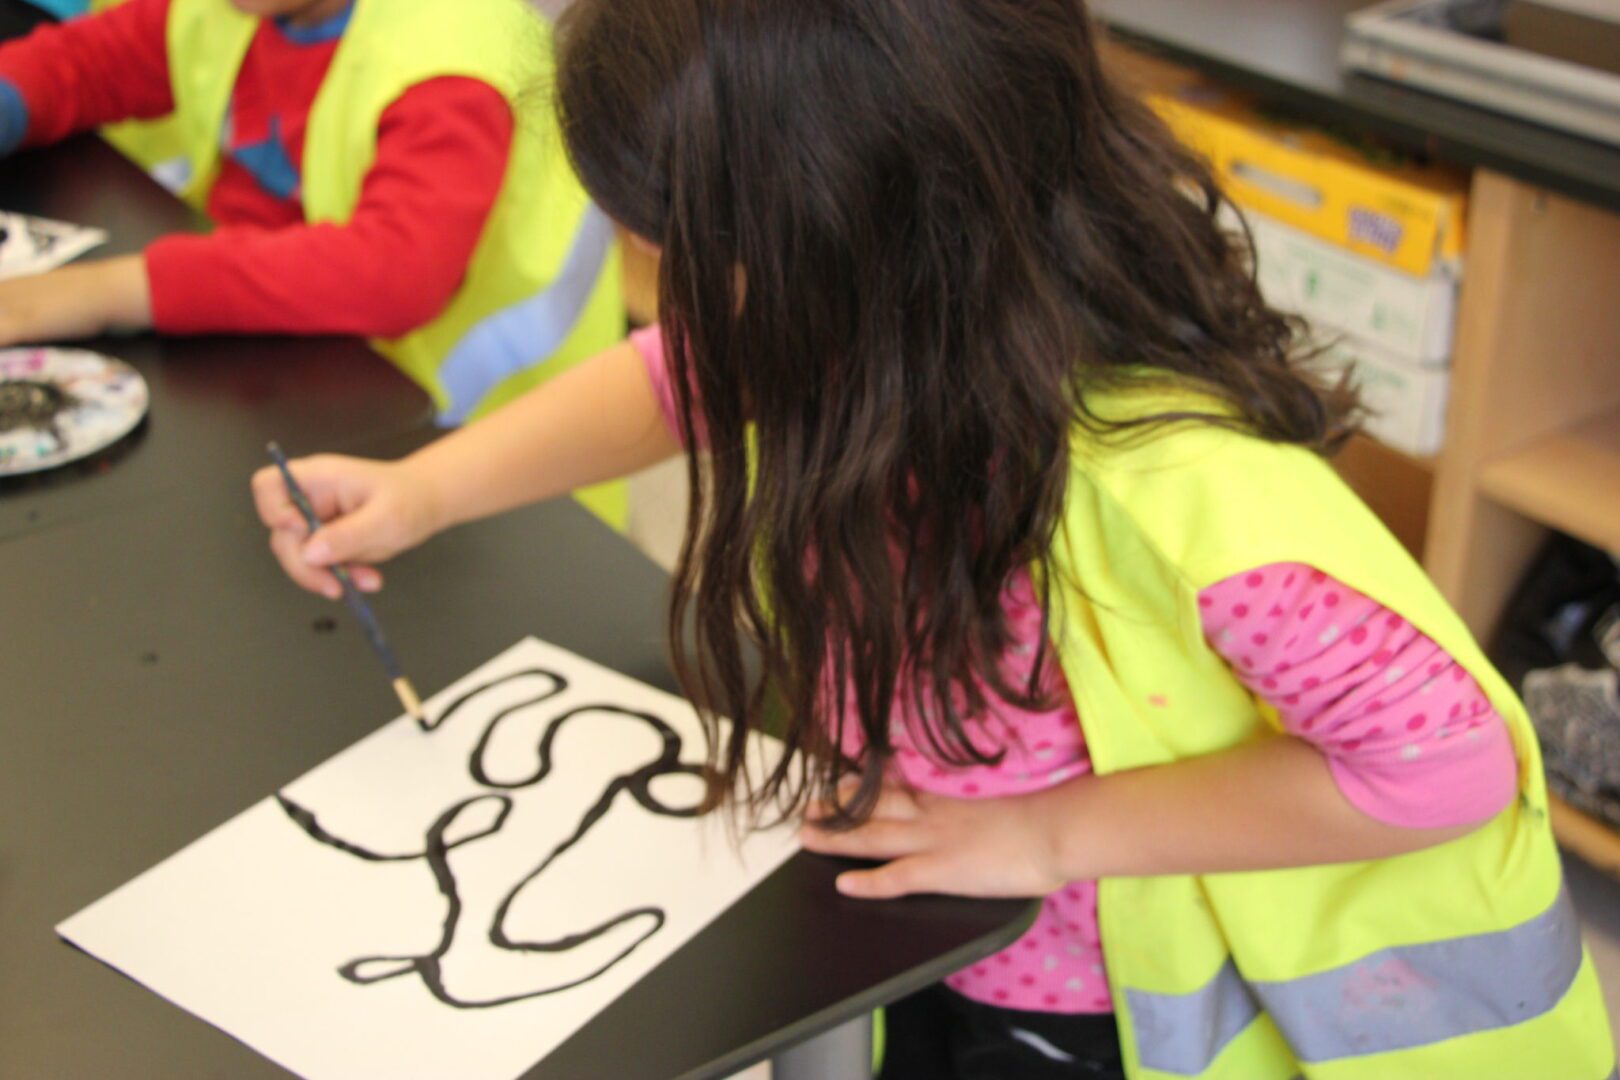 A girl in a yellow vest is drawing on paper.